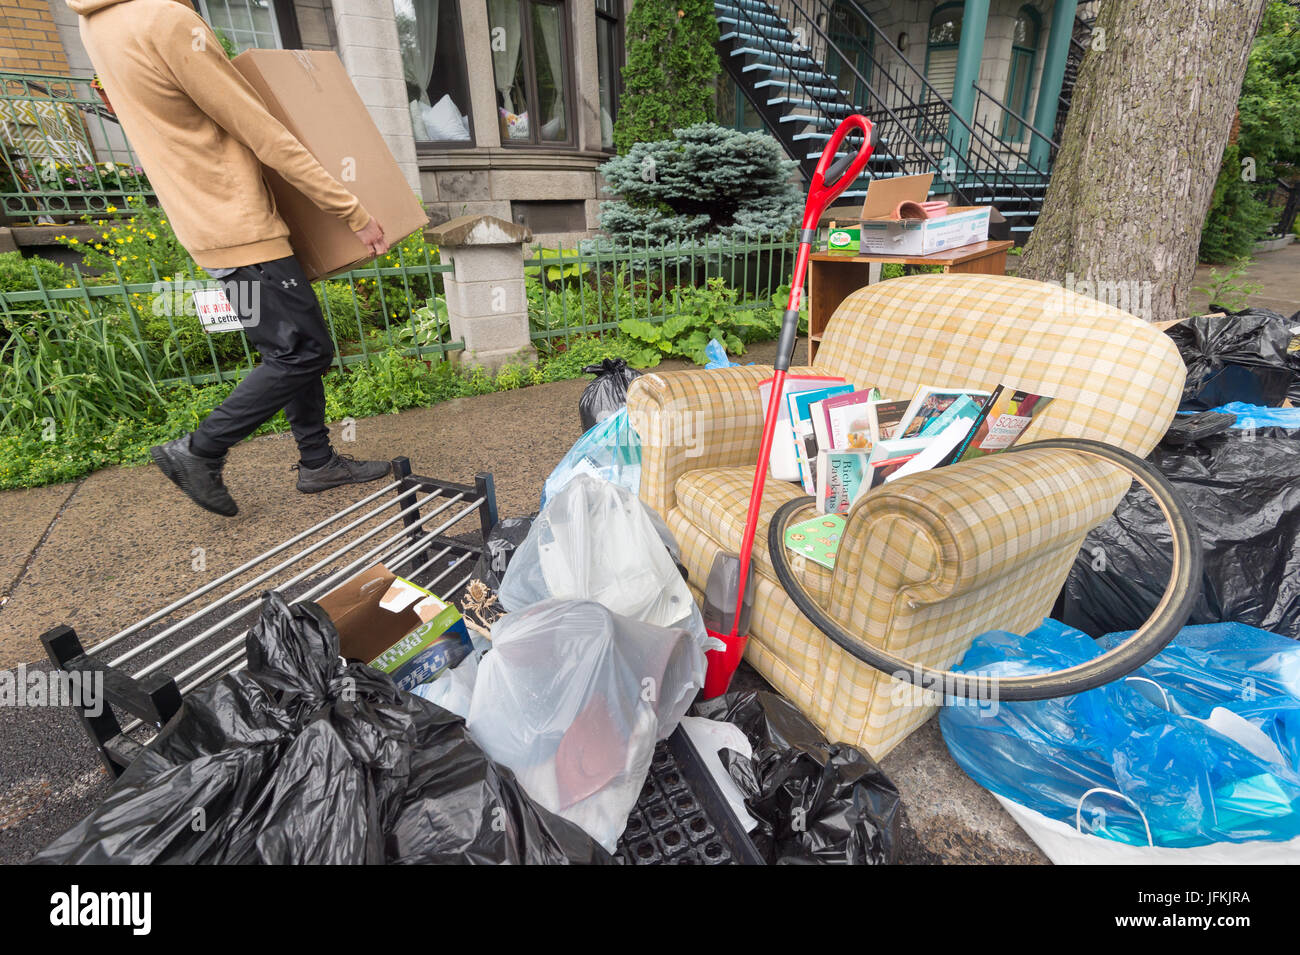 Montreal, Canada. 01st July, 2017. Moving Day in Montreal. In Quebec, July 1 (Canada Day) is also known as Moving Day. Credit: Marc Bruxelle/Alamy Live News Stock Photo